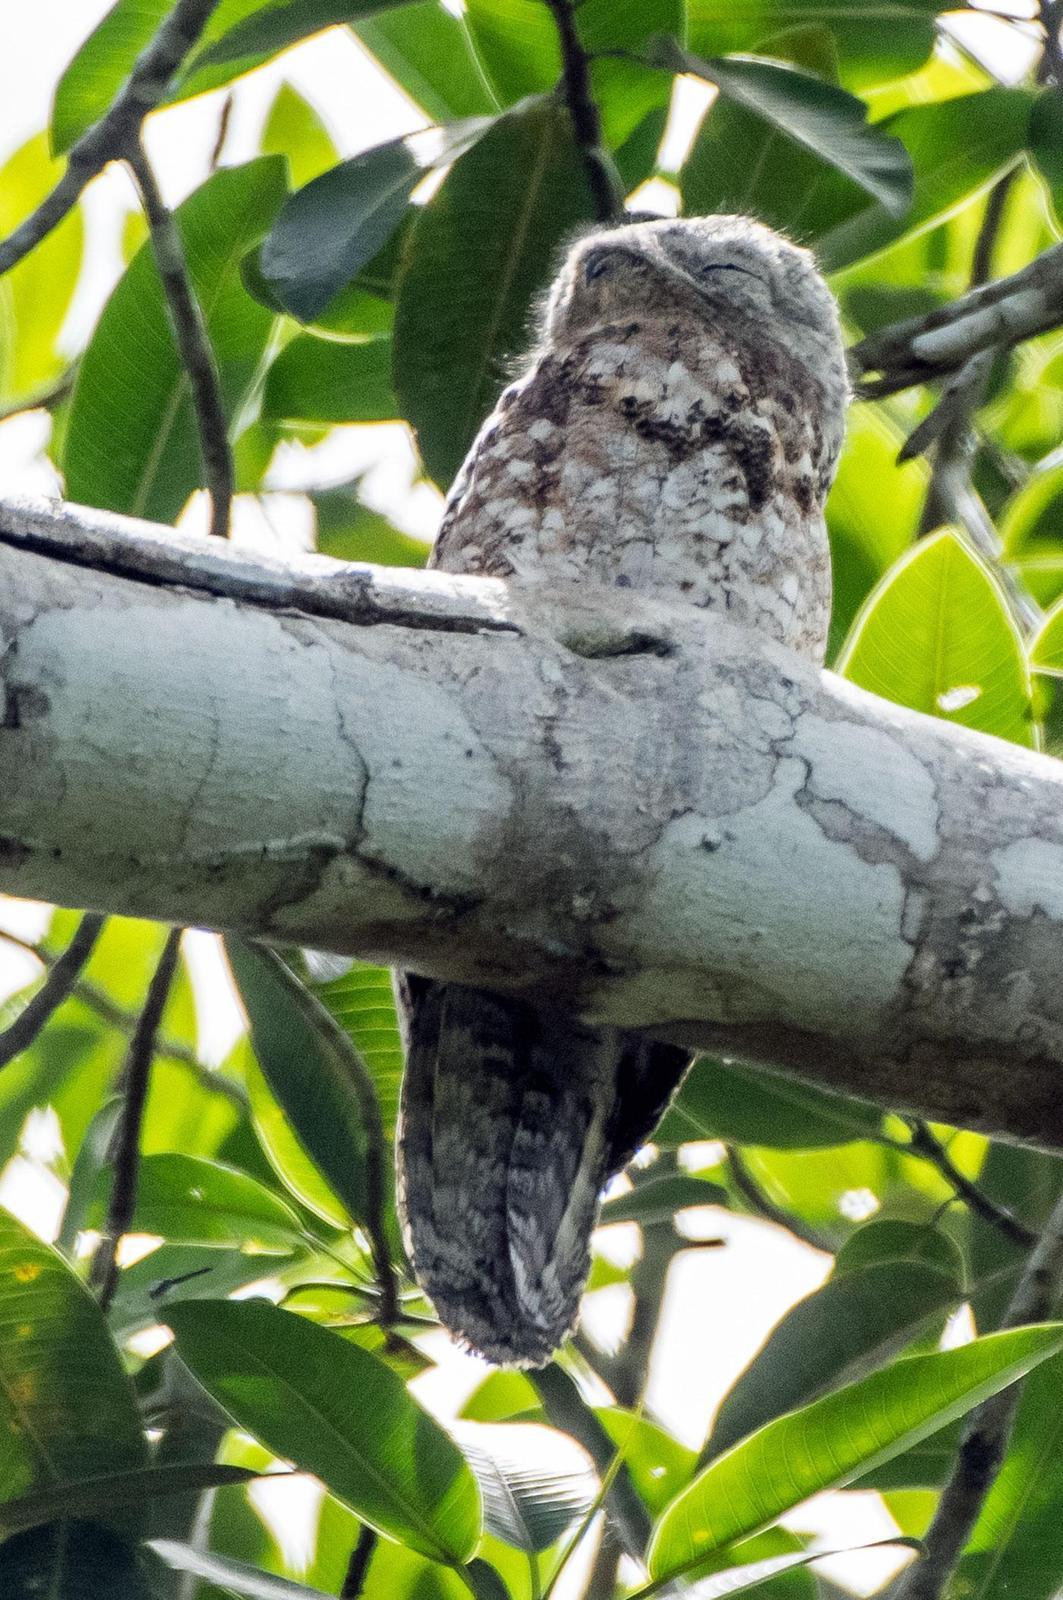 Great Potoo Photo by Phil Kahler